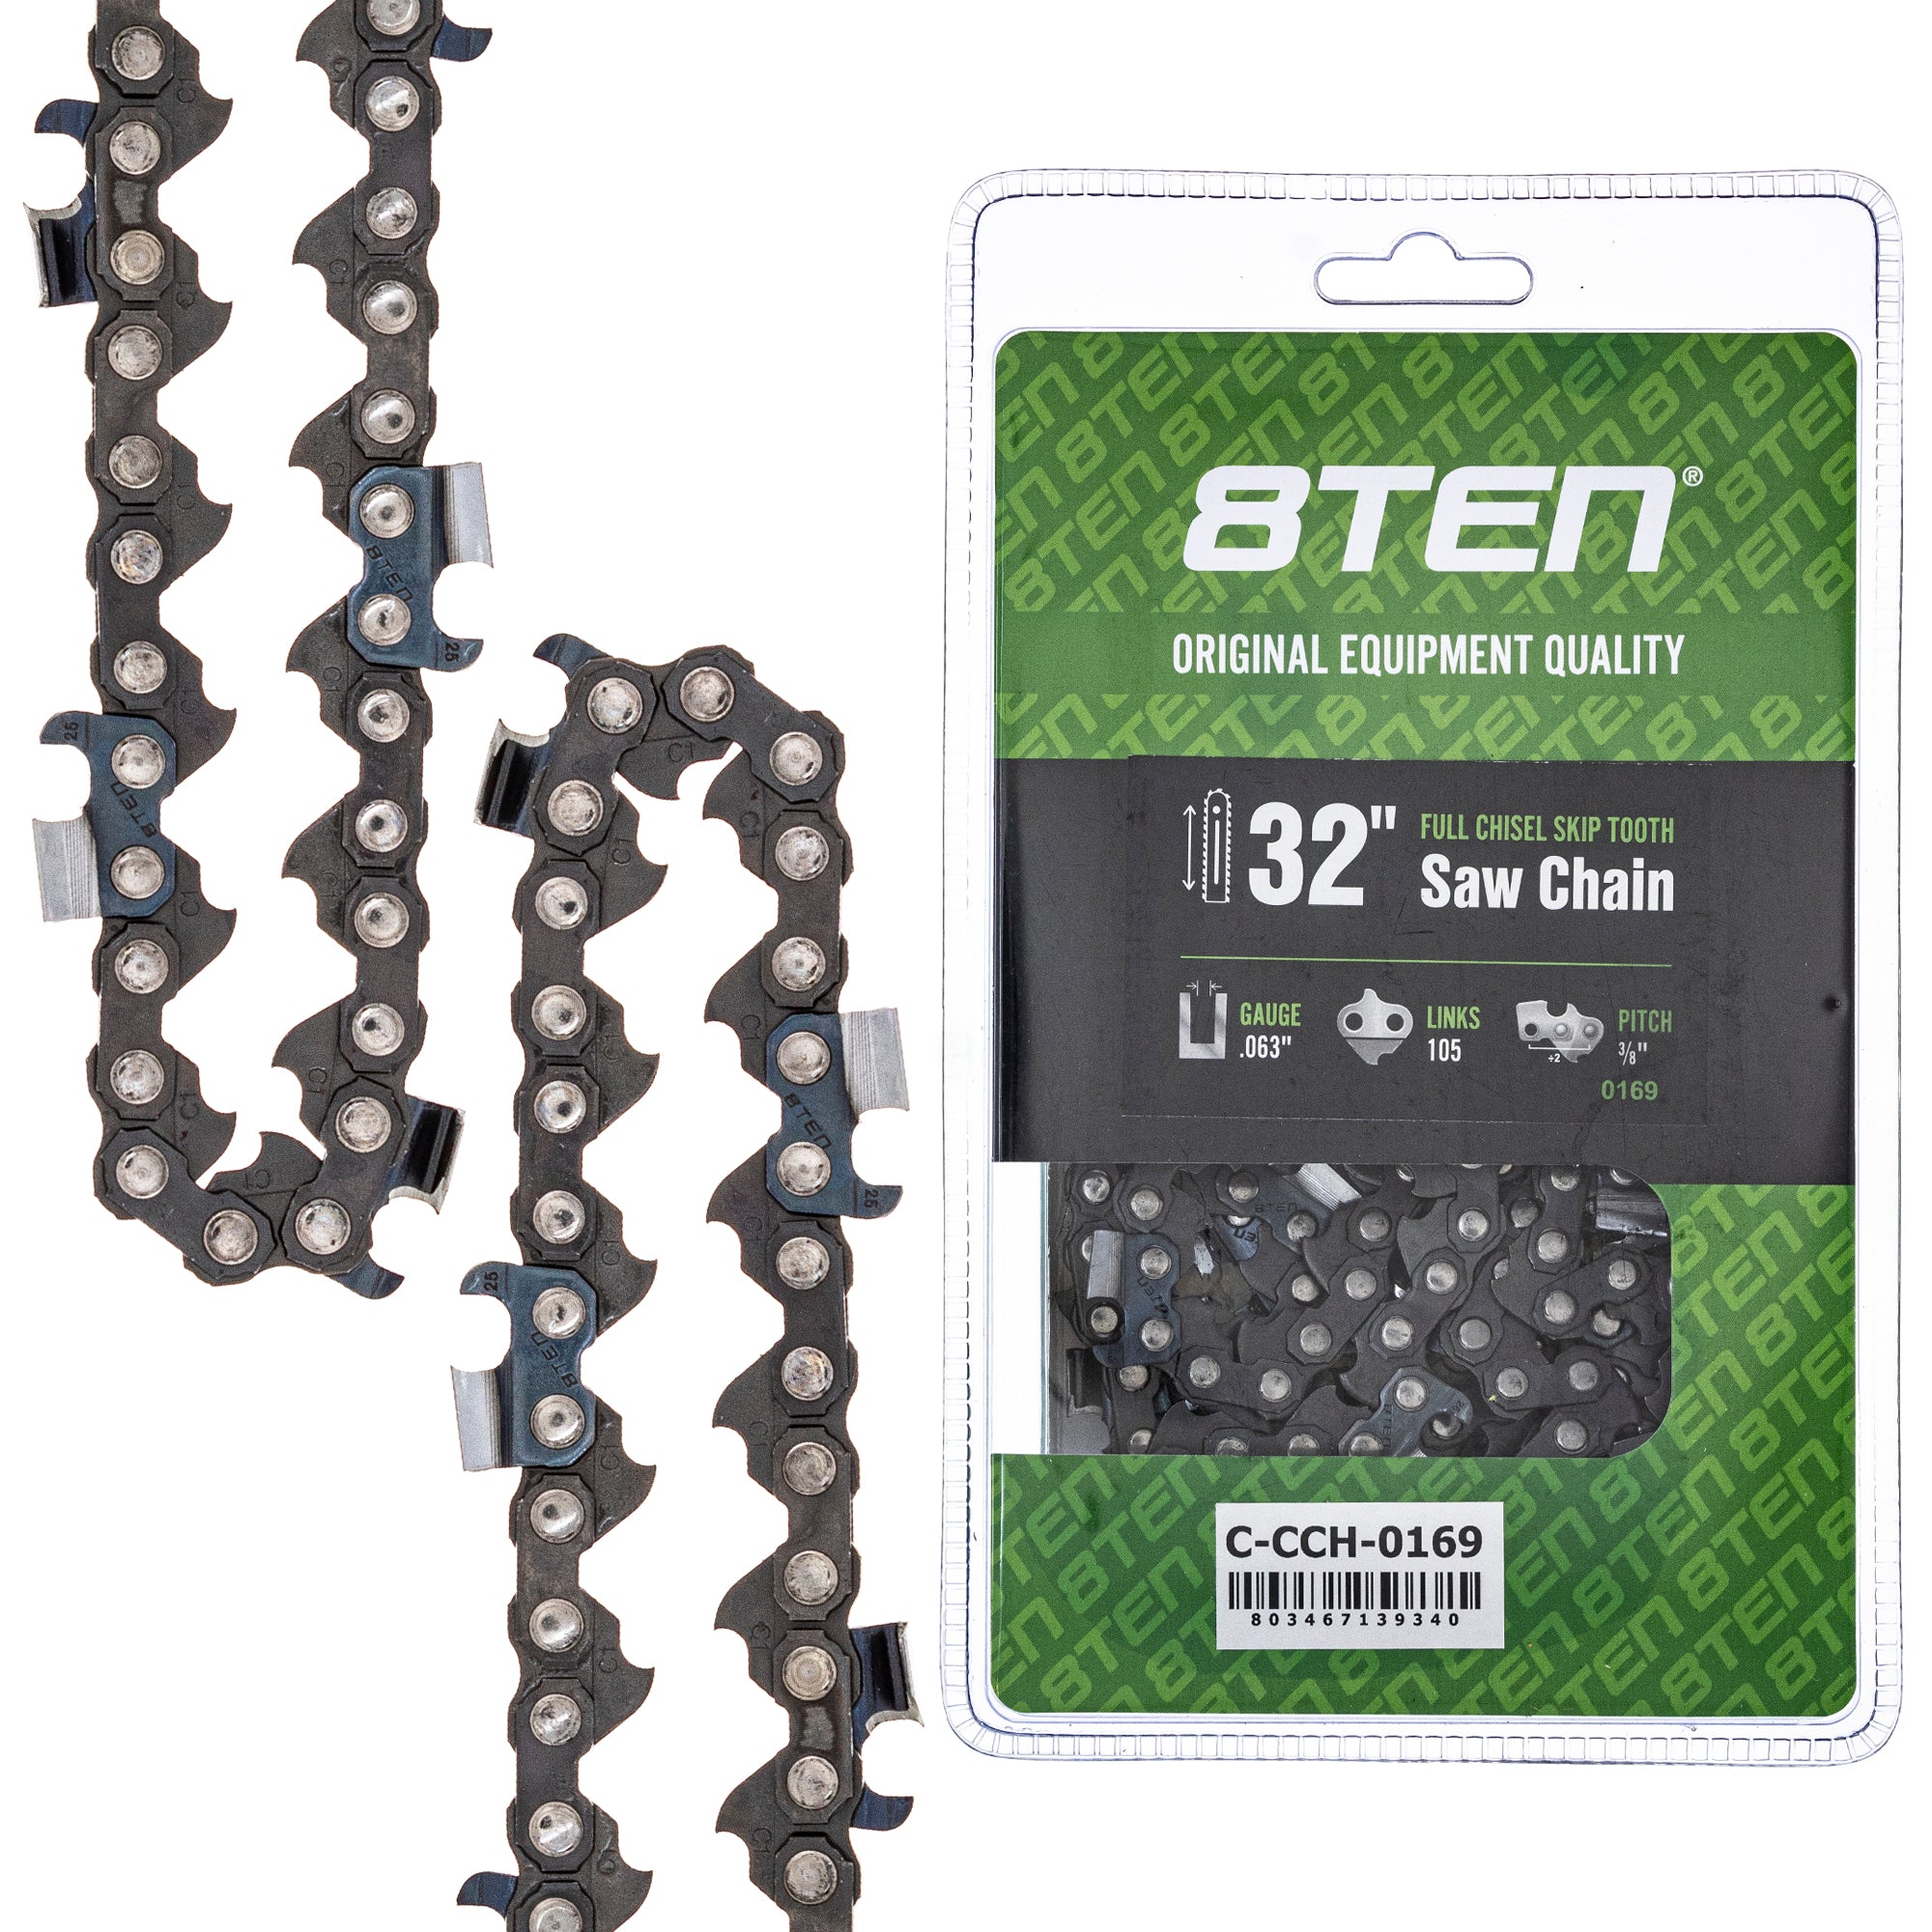 Chainsaw Chain 32 Inch .063 3/8 105DL for zOTHER Oregon XL VI Super PS 8TEN 810-CCC2381H